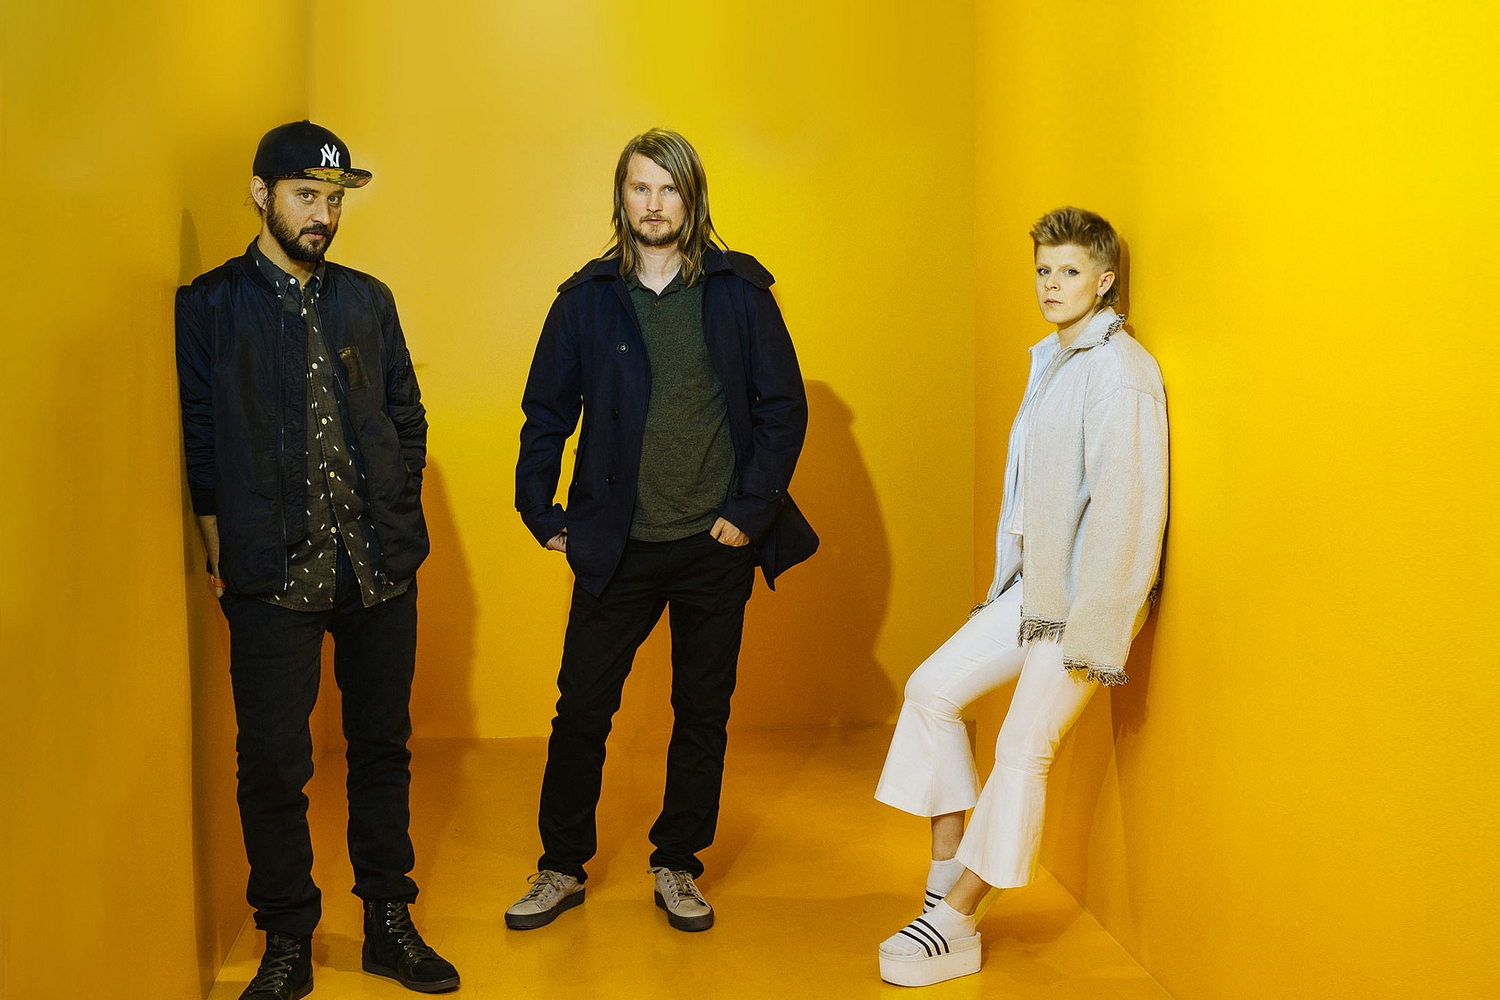 New issue of DIY out now feat Röyksopp and Robyn, Woman’s Hour & more